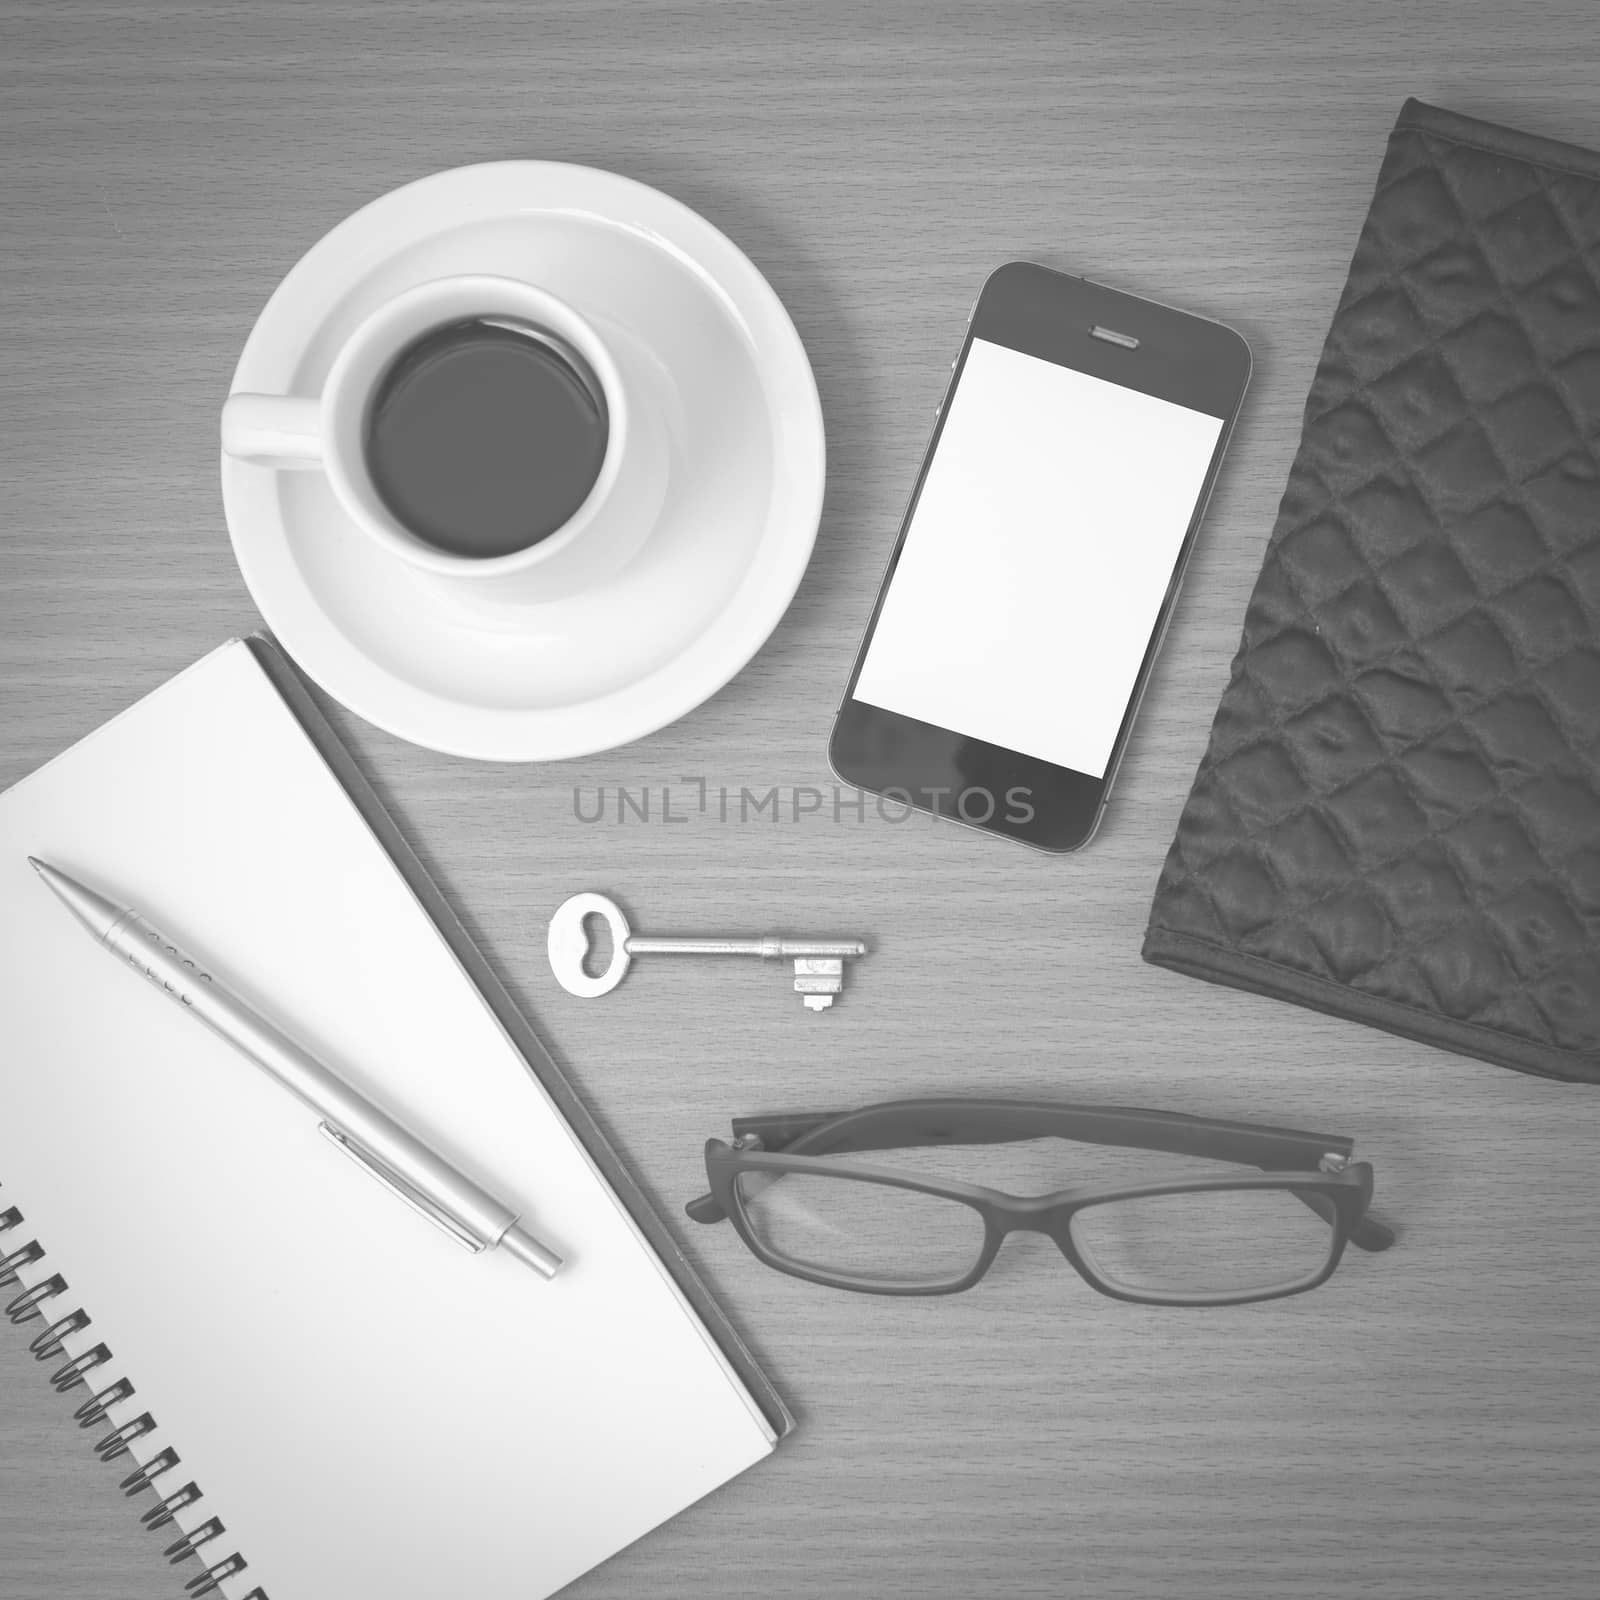 coffee and phone with notepad,key,eyeglasses and wallet on wood table background black and white color